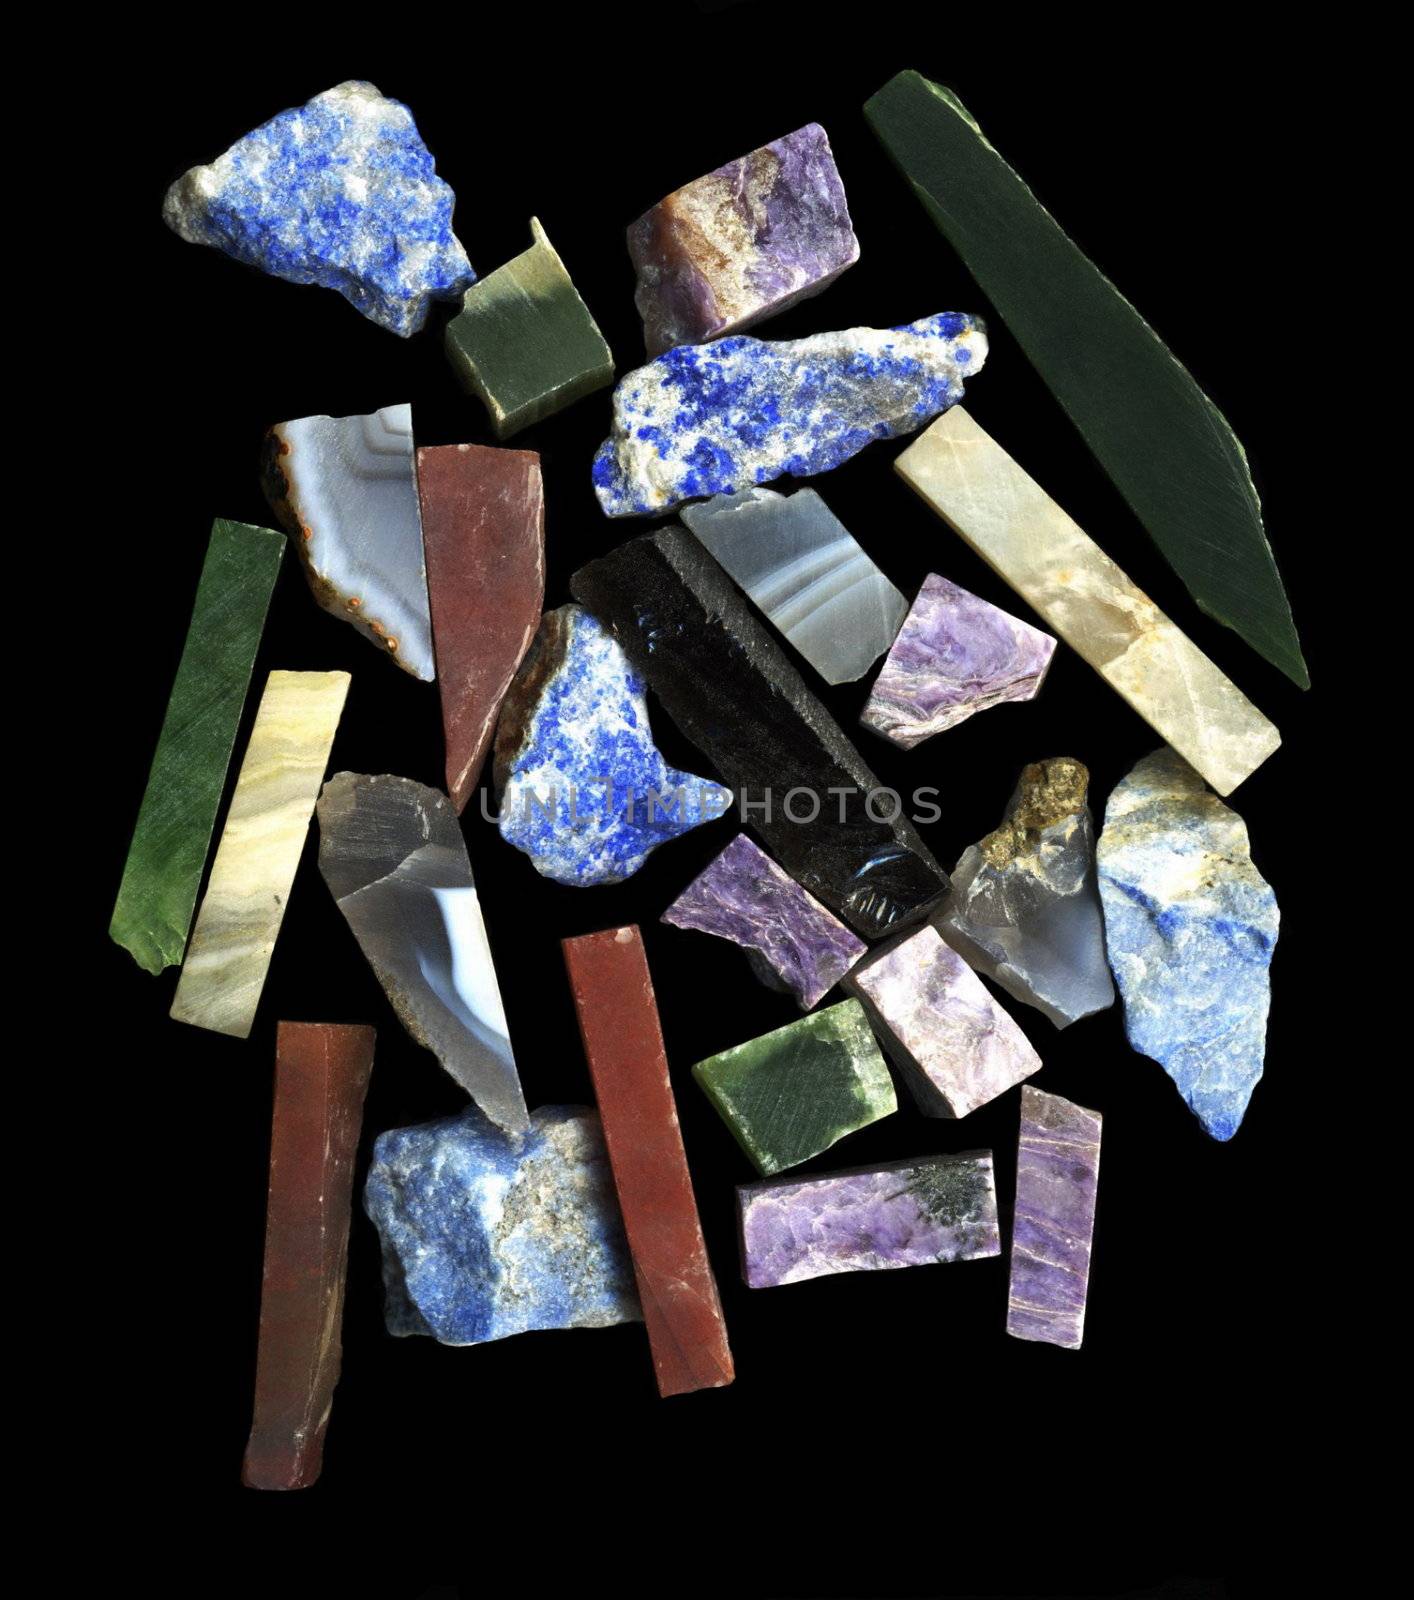 Pieses of semiprecious gems on black background